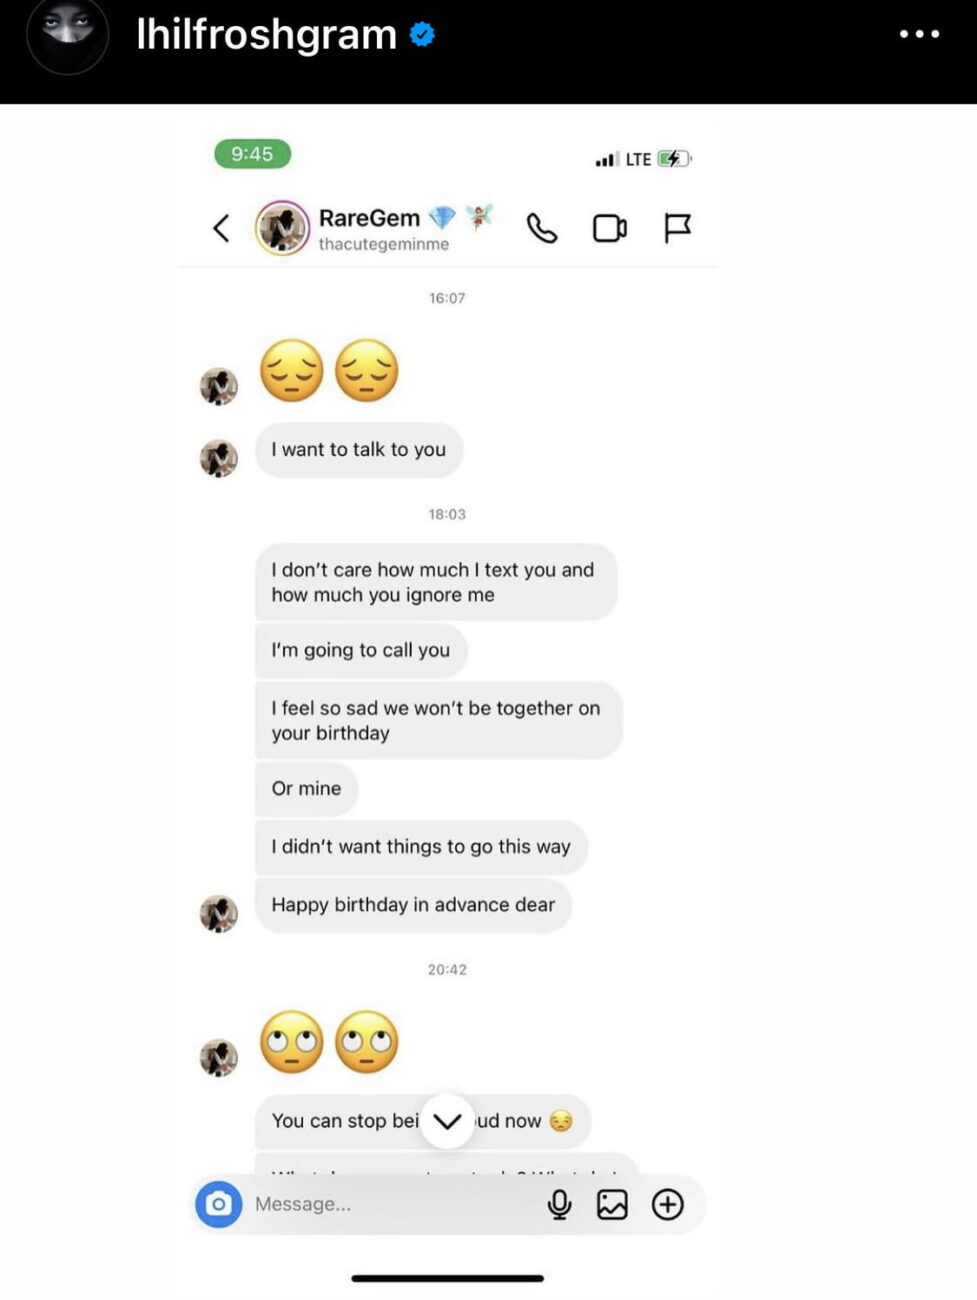 Screenshots posted by Lil Frosh in his new post accusing his ex-girlfriend of ruining his life.